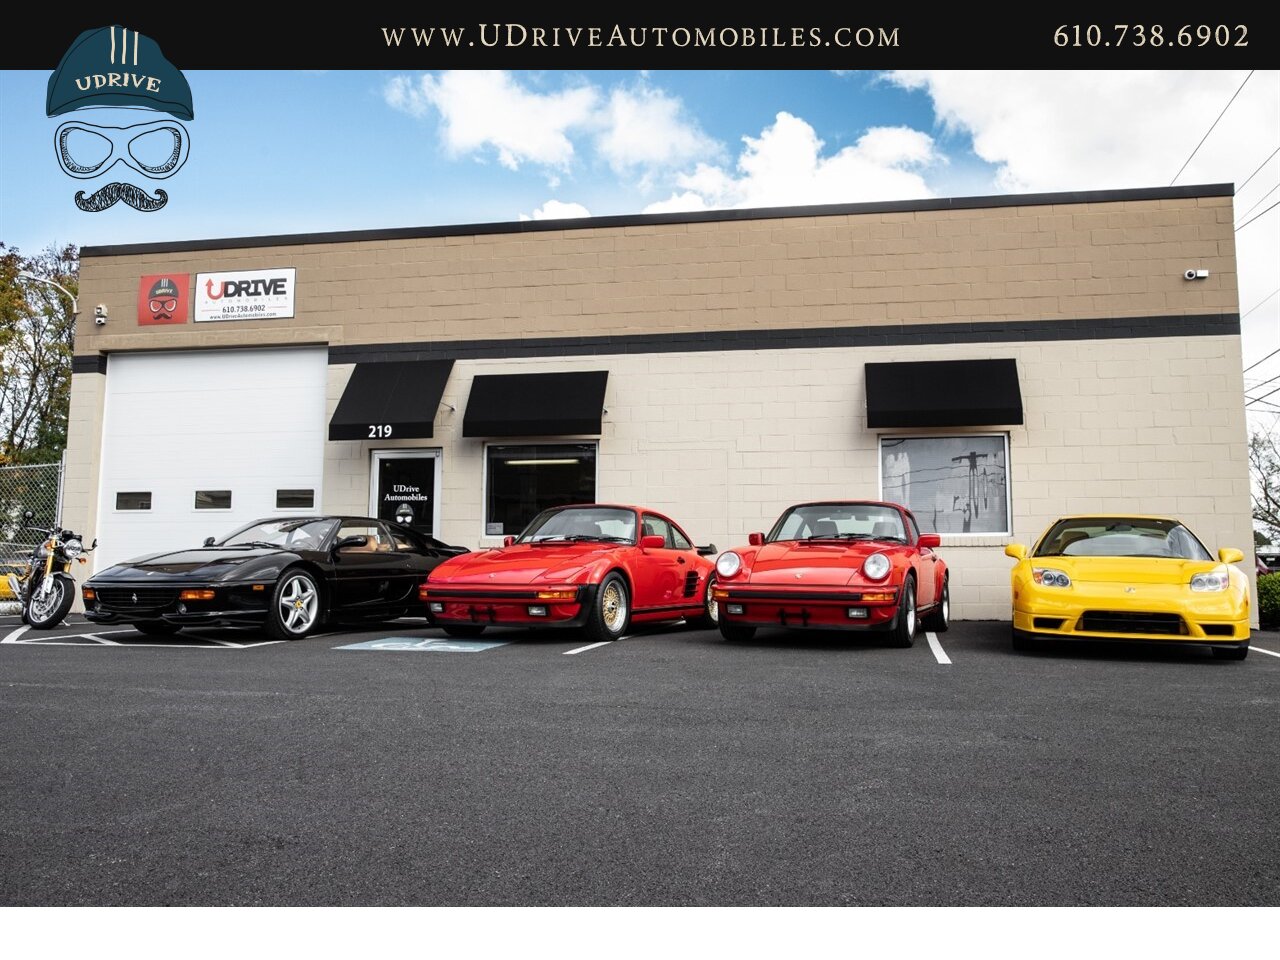 2004 Acura NSX NSX-T 21k mIles Red over Black  Fresh Timing Belt Service - Photo 56 - West Chester, PA 19382